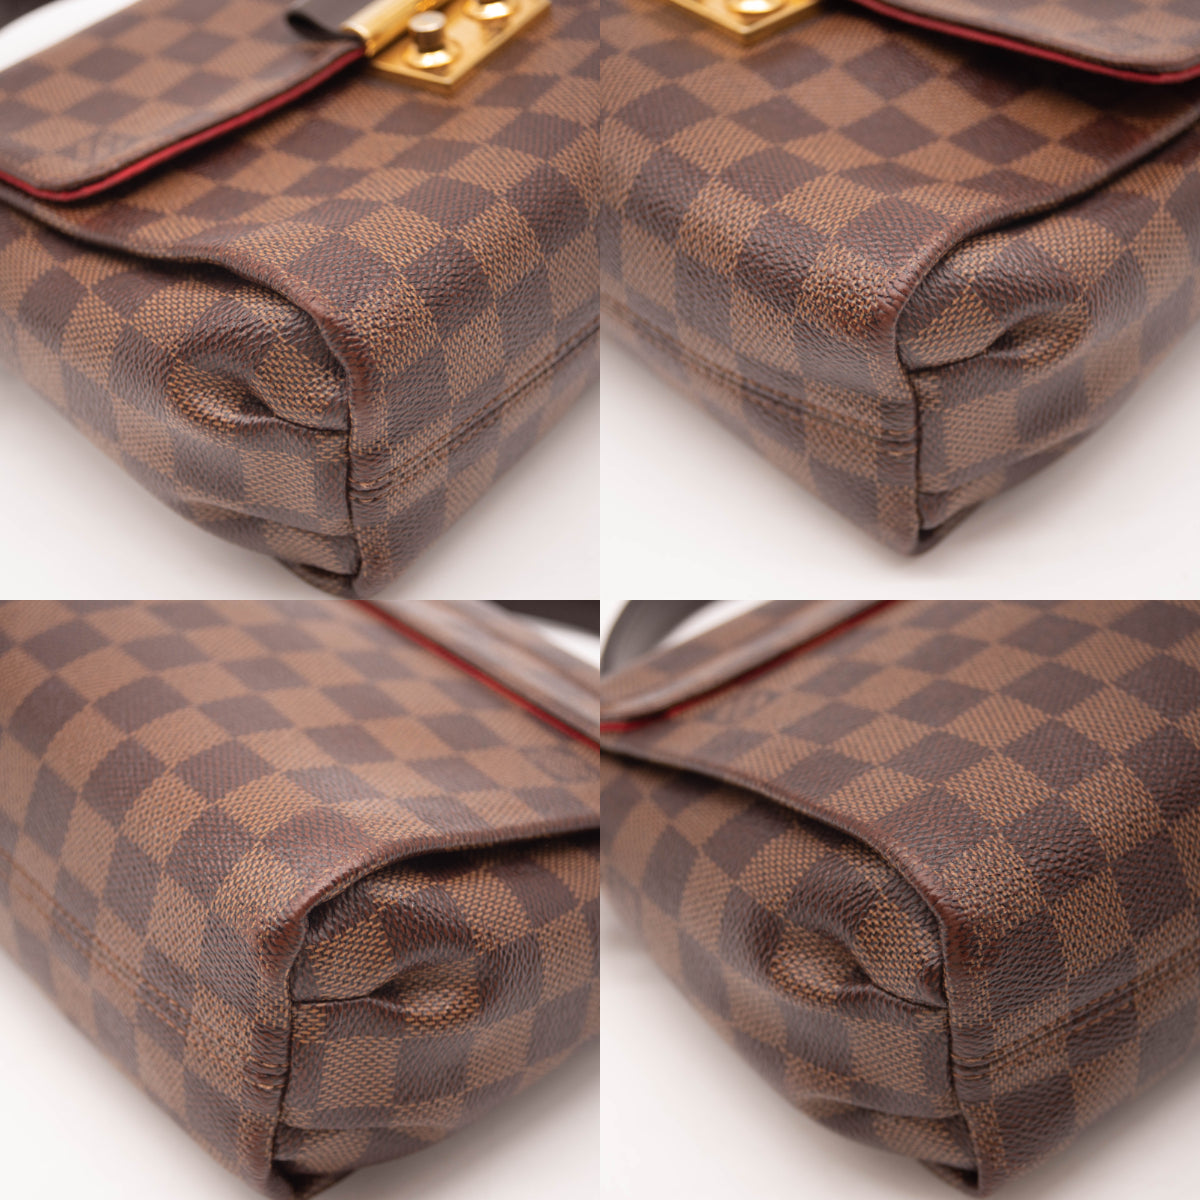 Banananina Product Review: Louis Vuitton Damier Ebene Croisette  Crafted  of Louis Vuitton Damier ebene coated canvas. This bag features leather trim  and sturdy top handle, an optional shoulder strap and a